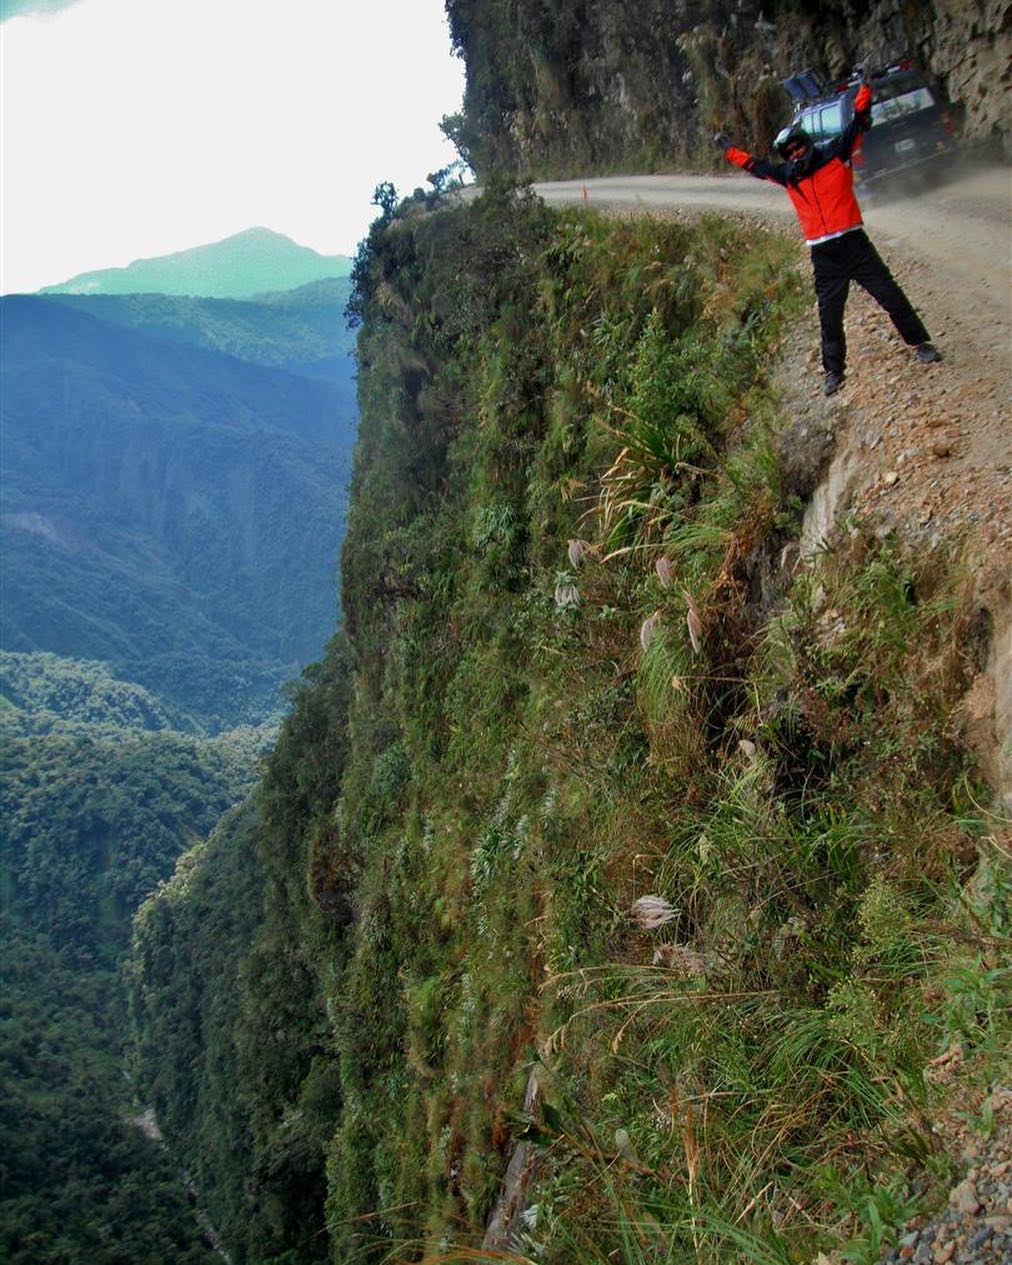 The death road in Bolivia